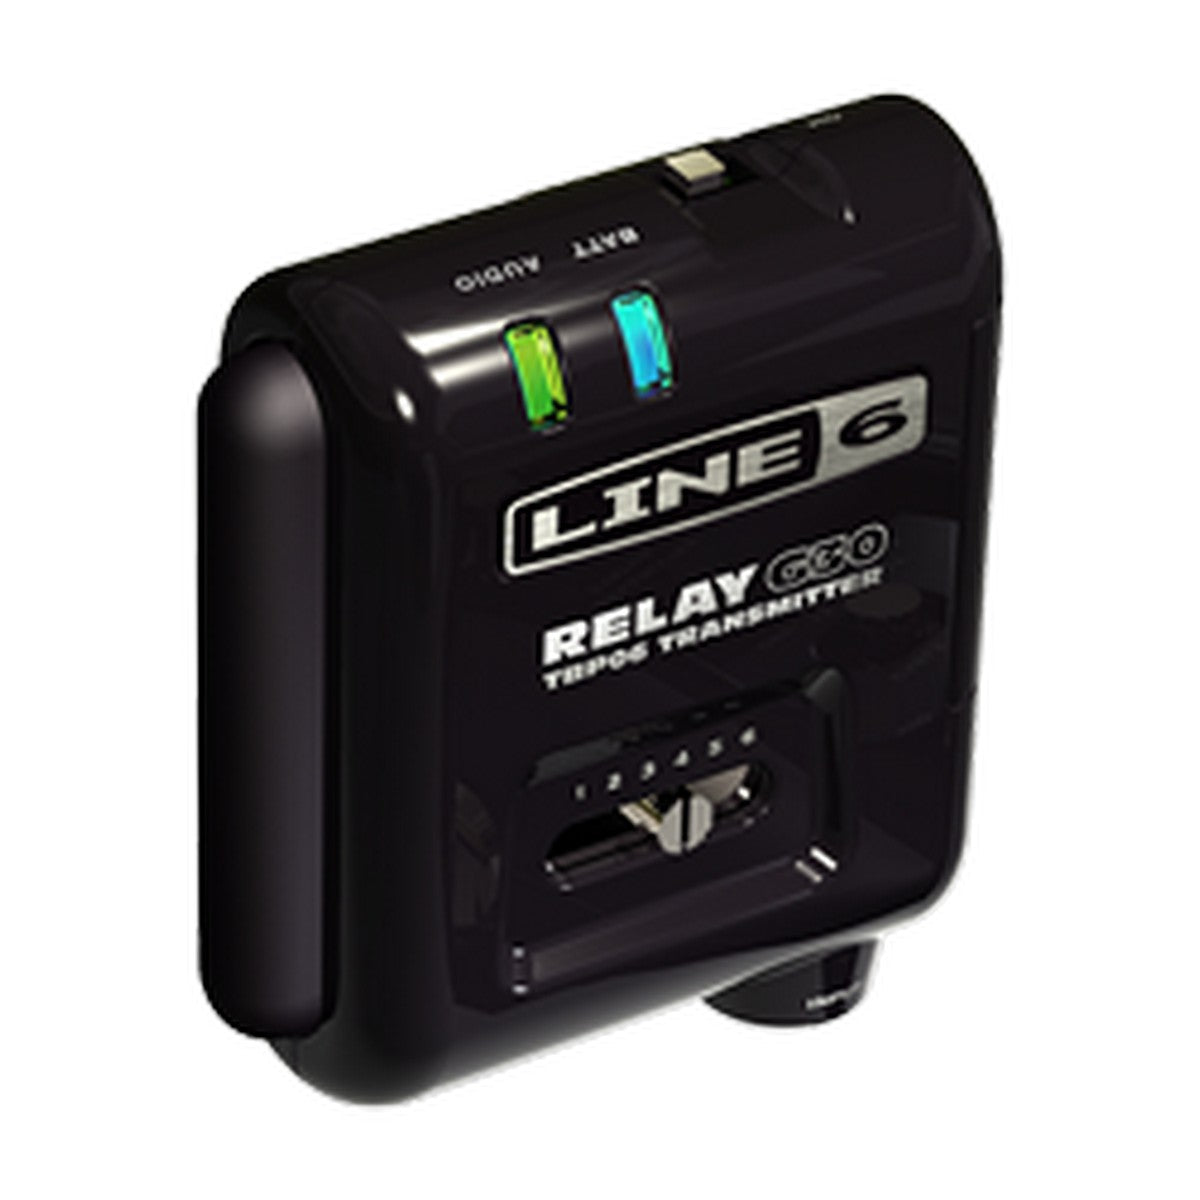 Line 6 Relay G30 Bodypack | 98-033-0001 Separate Digital Wireless Transmitter Component for the Relay G30